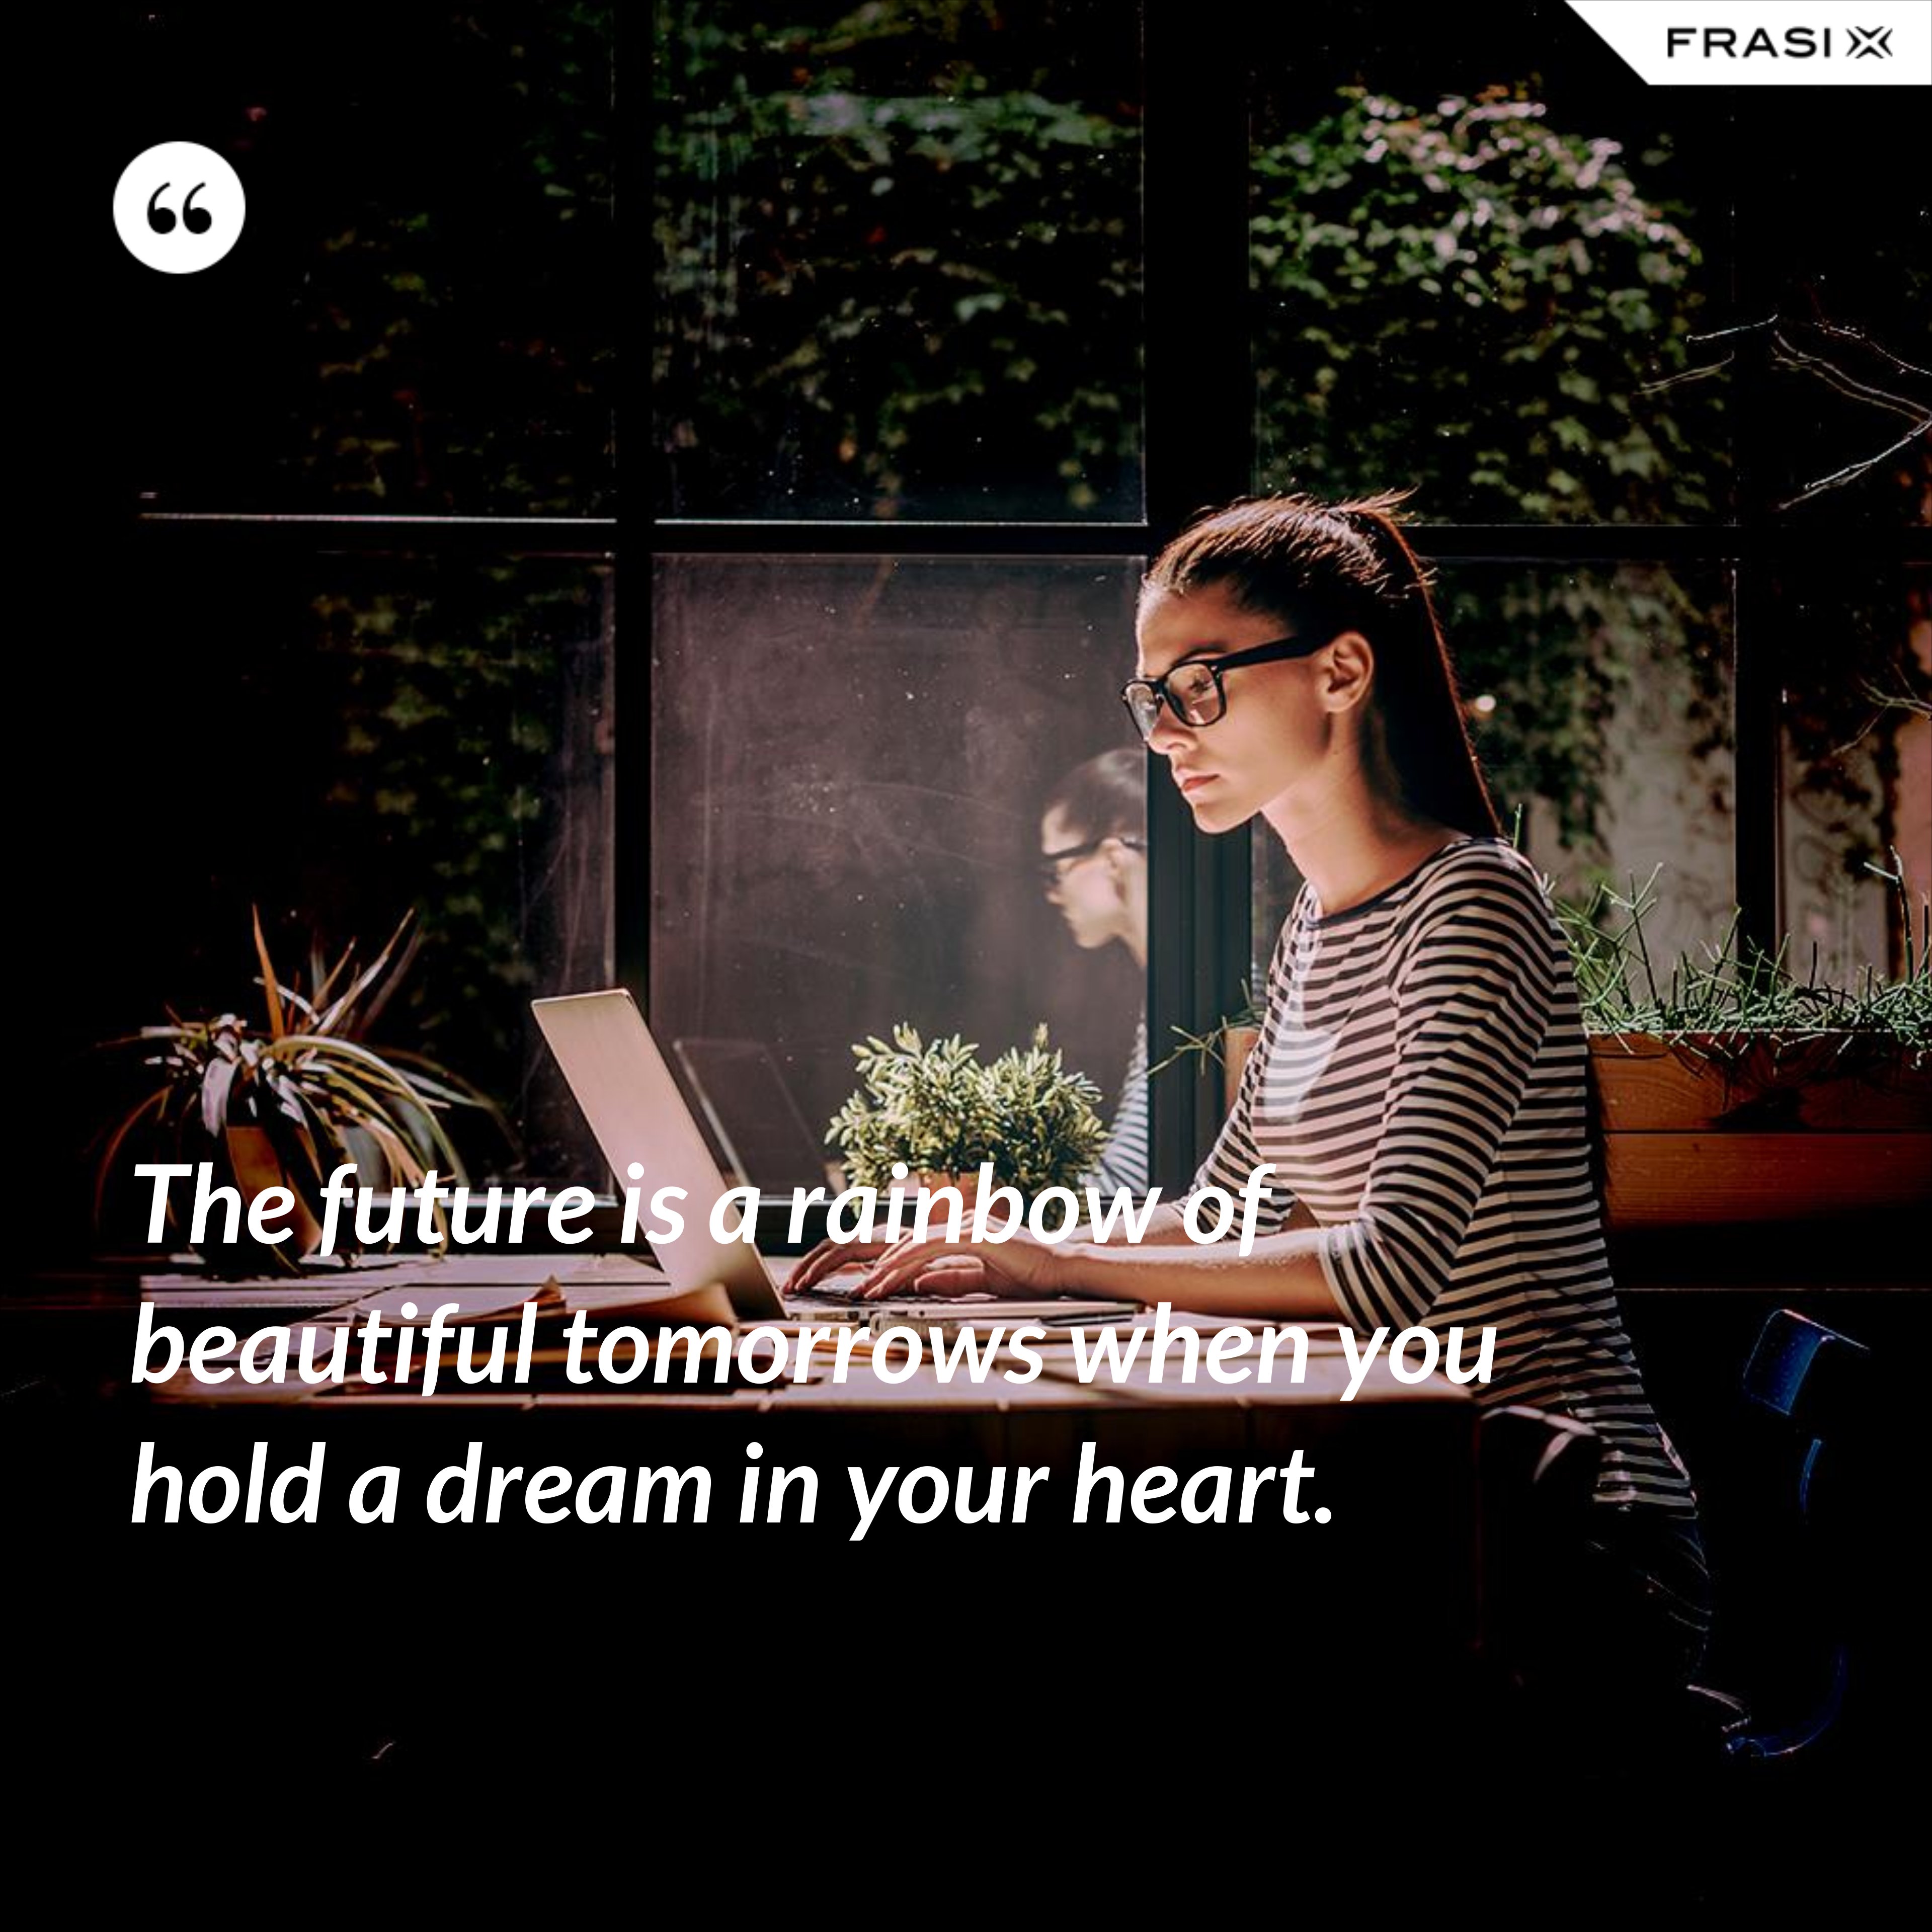 The future is a rainbow of beautiful tomorrows when you hold a dream in your heart. - Anonimo